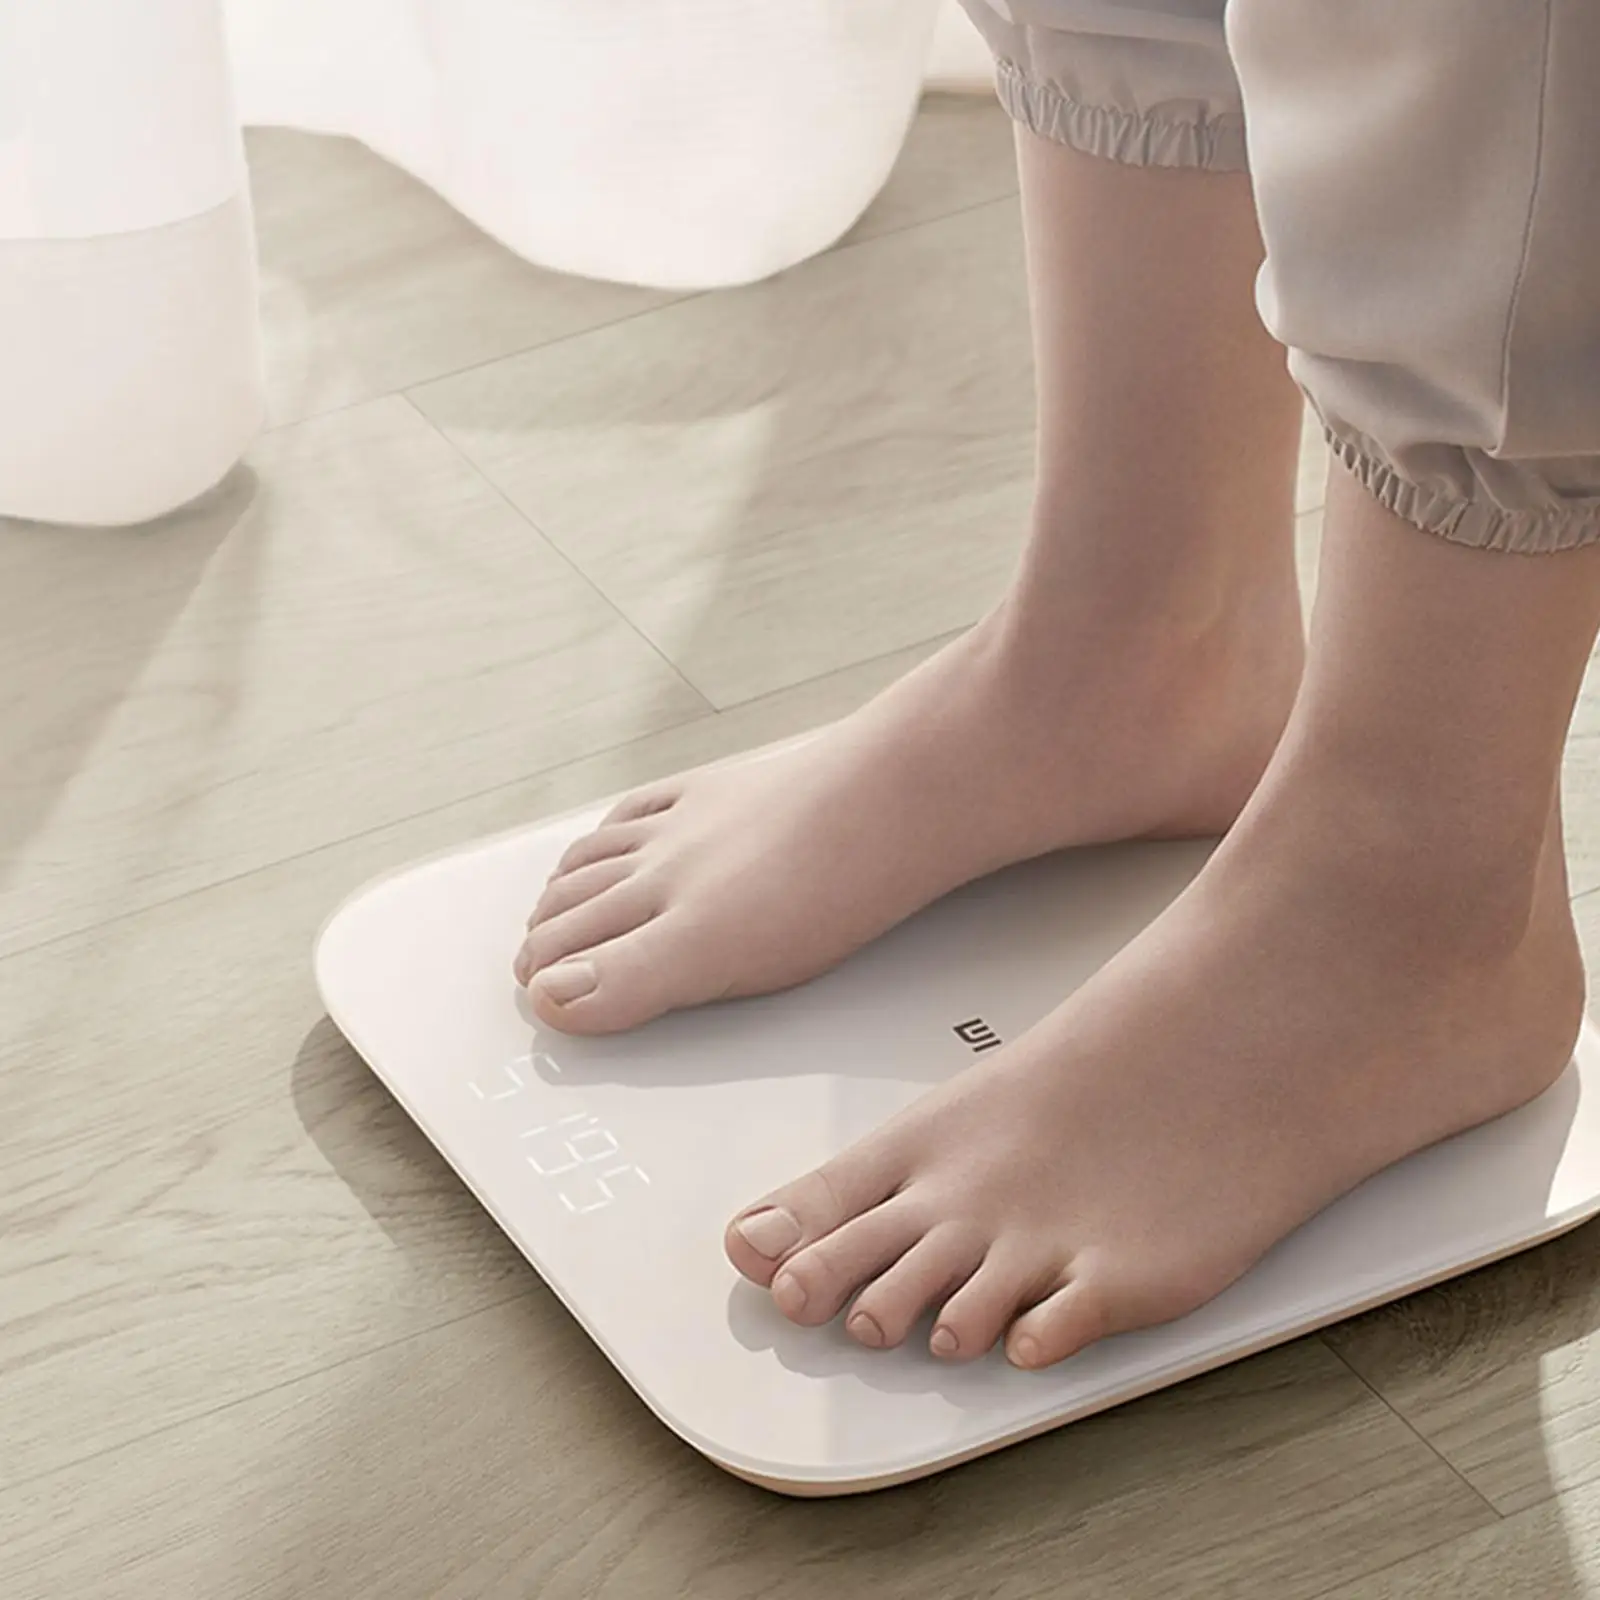 Digital Weighting Scale Two Kitchen Scales Bmi Calculator Displayed kg, Pounds 11.0211.020.87